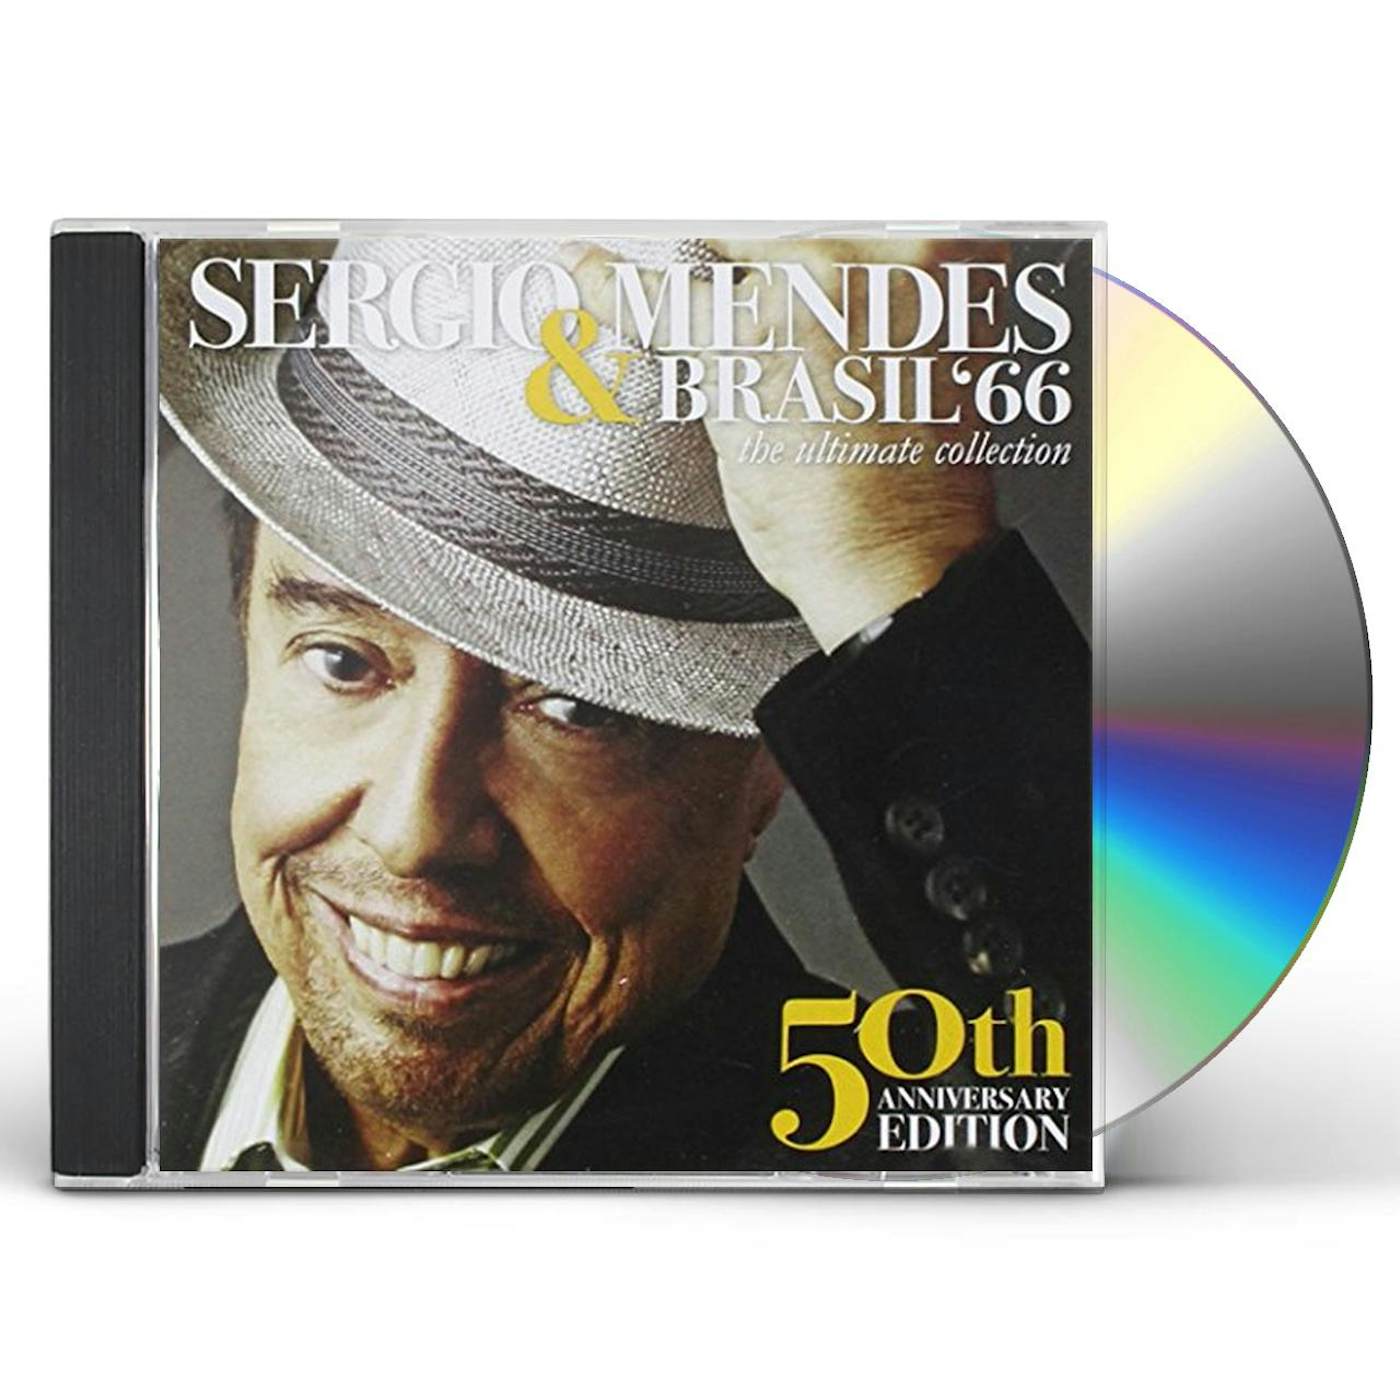 Sergio Mendes & Brasil '66 ULTIMATE COLLECTION: 50TH ANNIVERSARY EDITION CD